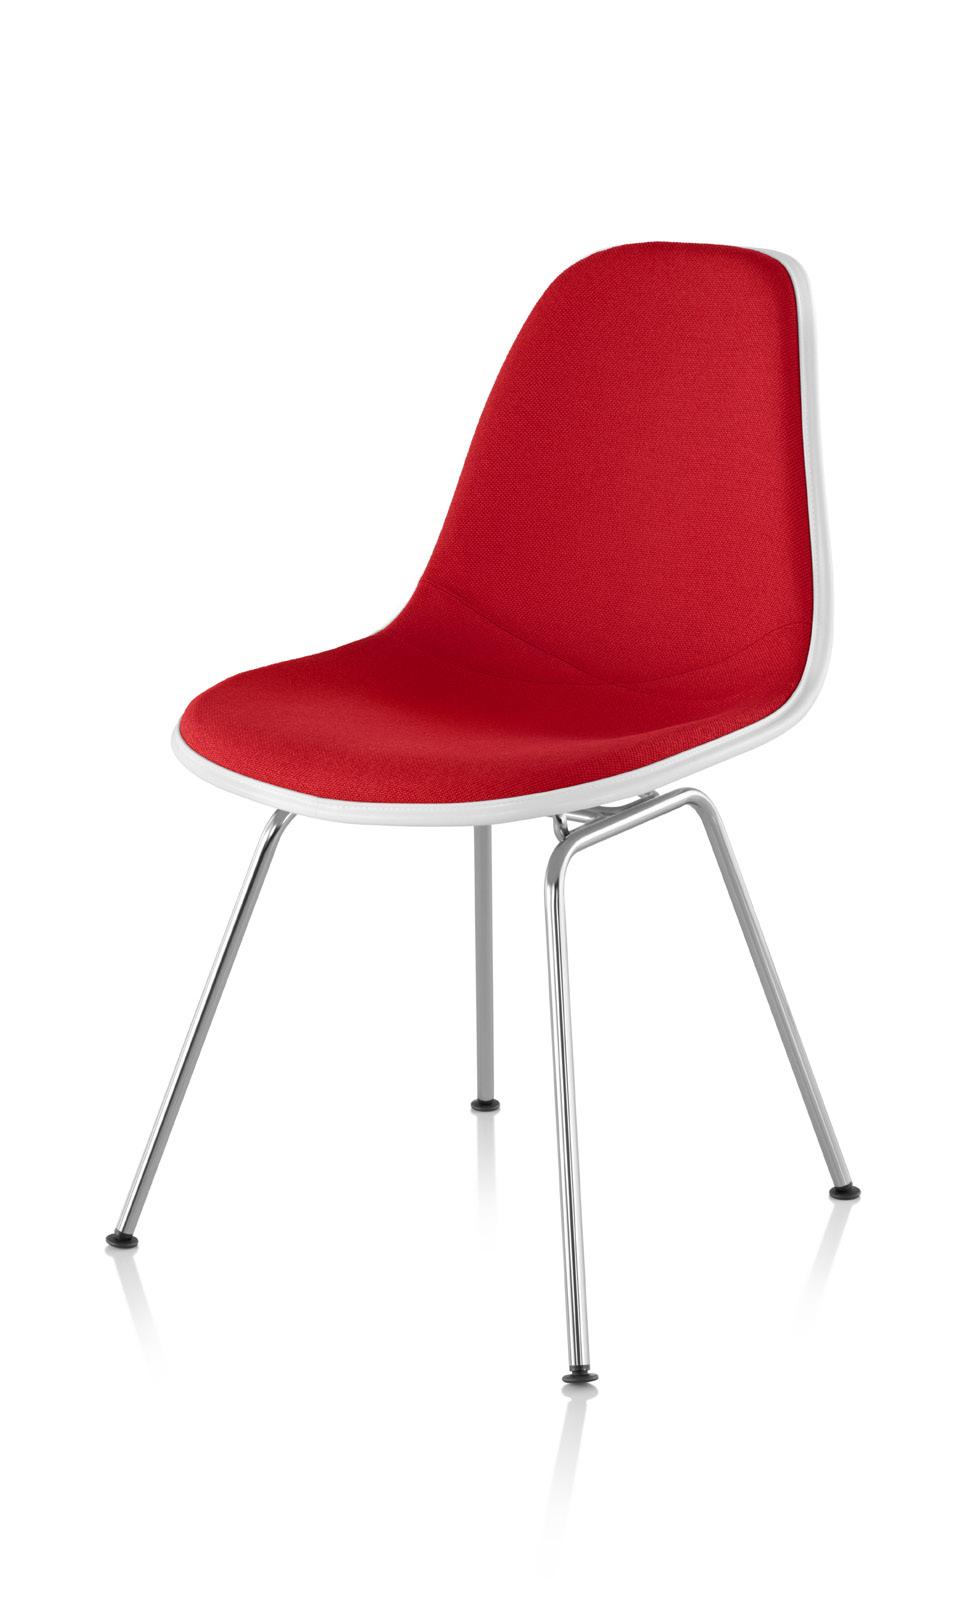 Eames Upholstered Molded Plastic Side Chair 4-Leg Base Exemplifying the designers mantra of the best for the most for the least, molded plastic side chair is as stylish today as